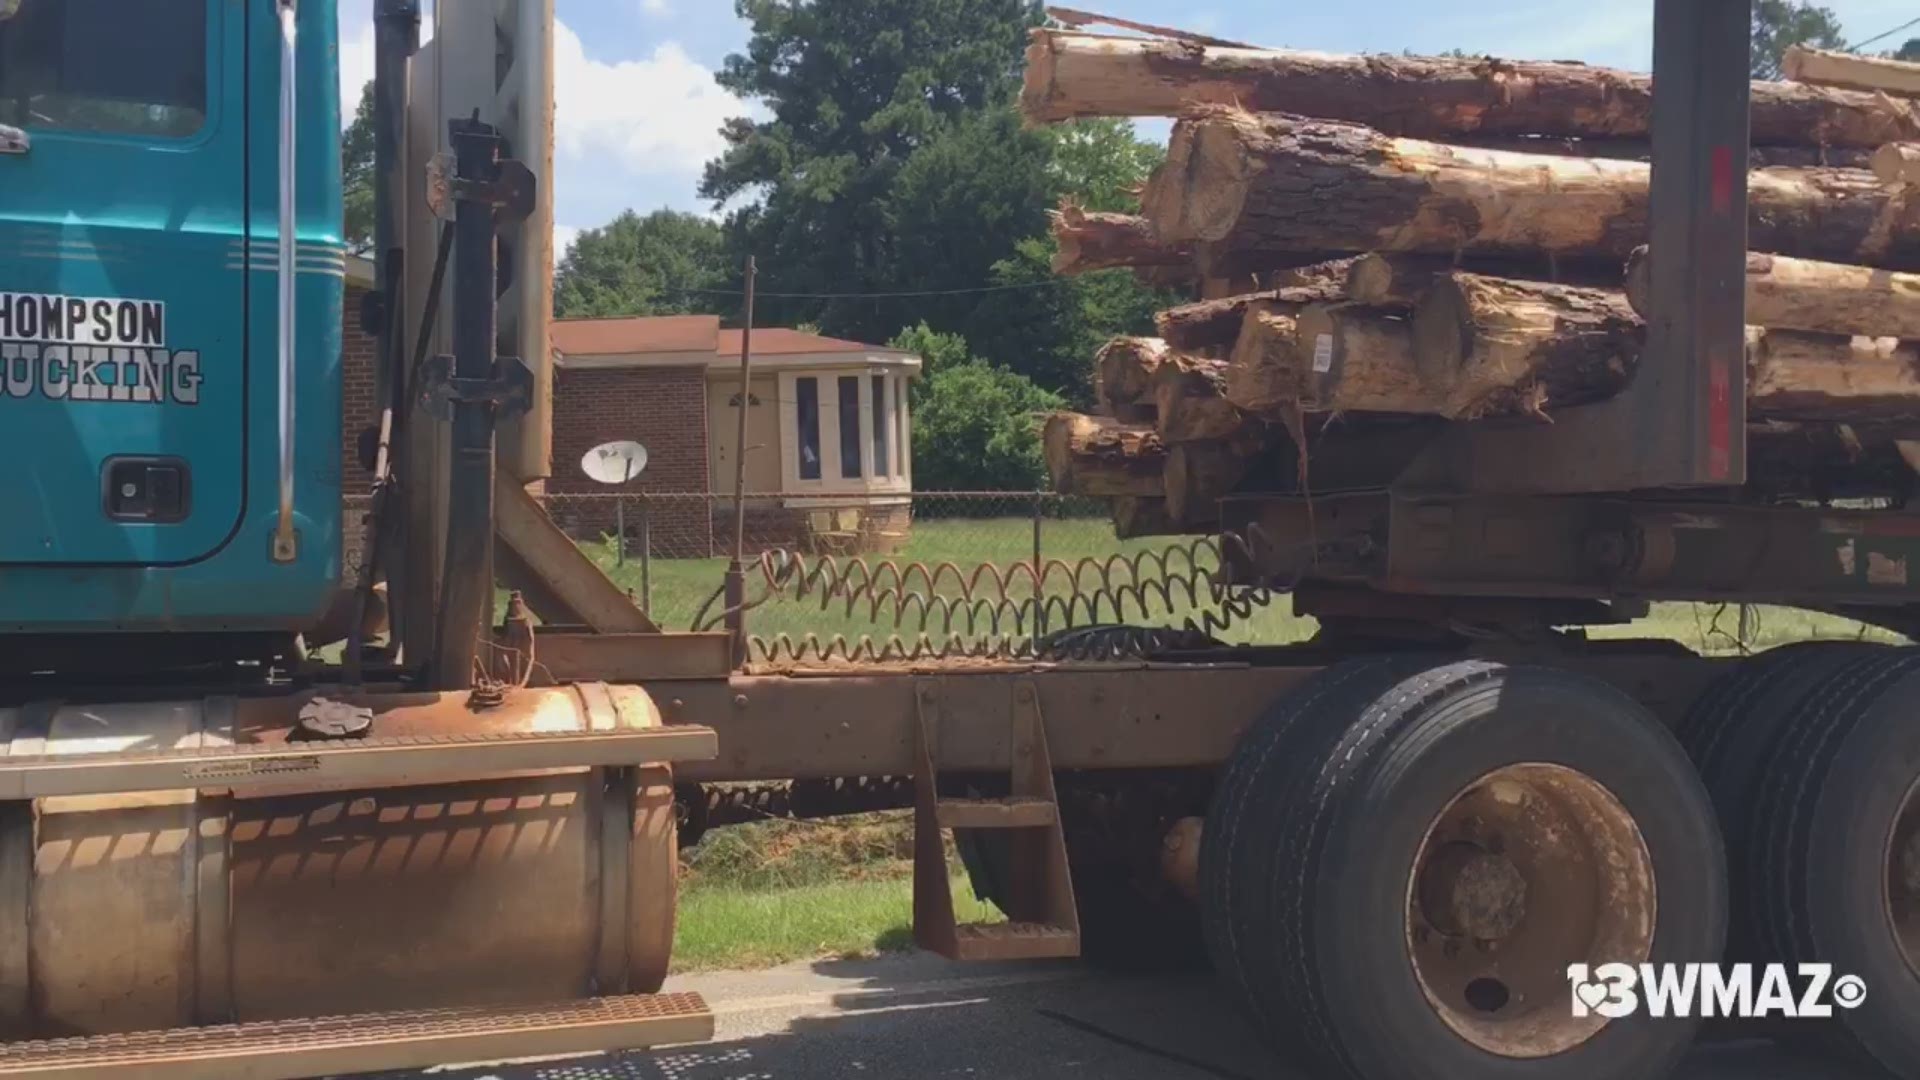 Jeffersonville Road is blocked after a log truck spilled its load Thursday morning. No one was injured in the crash, but a gas main was hit.